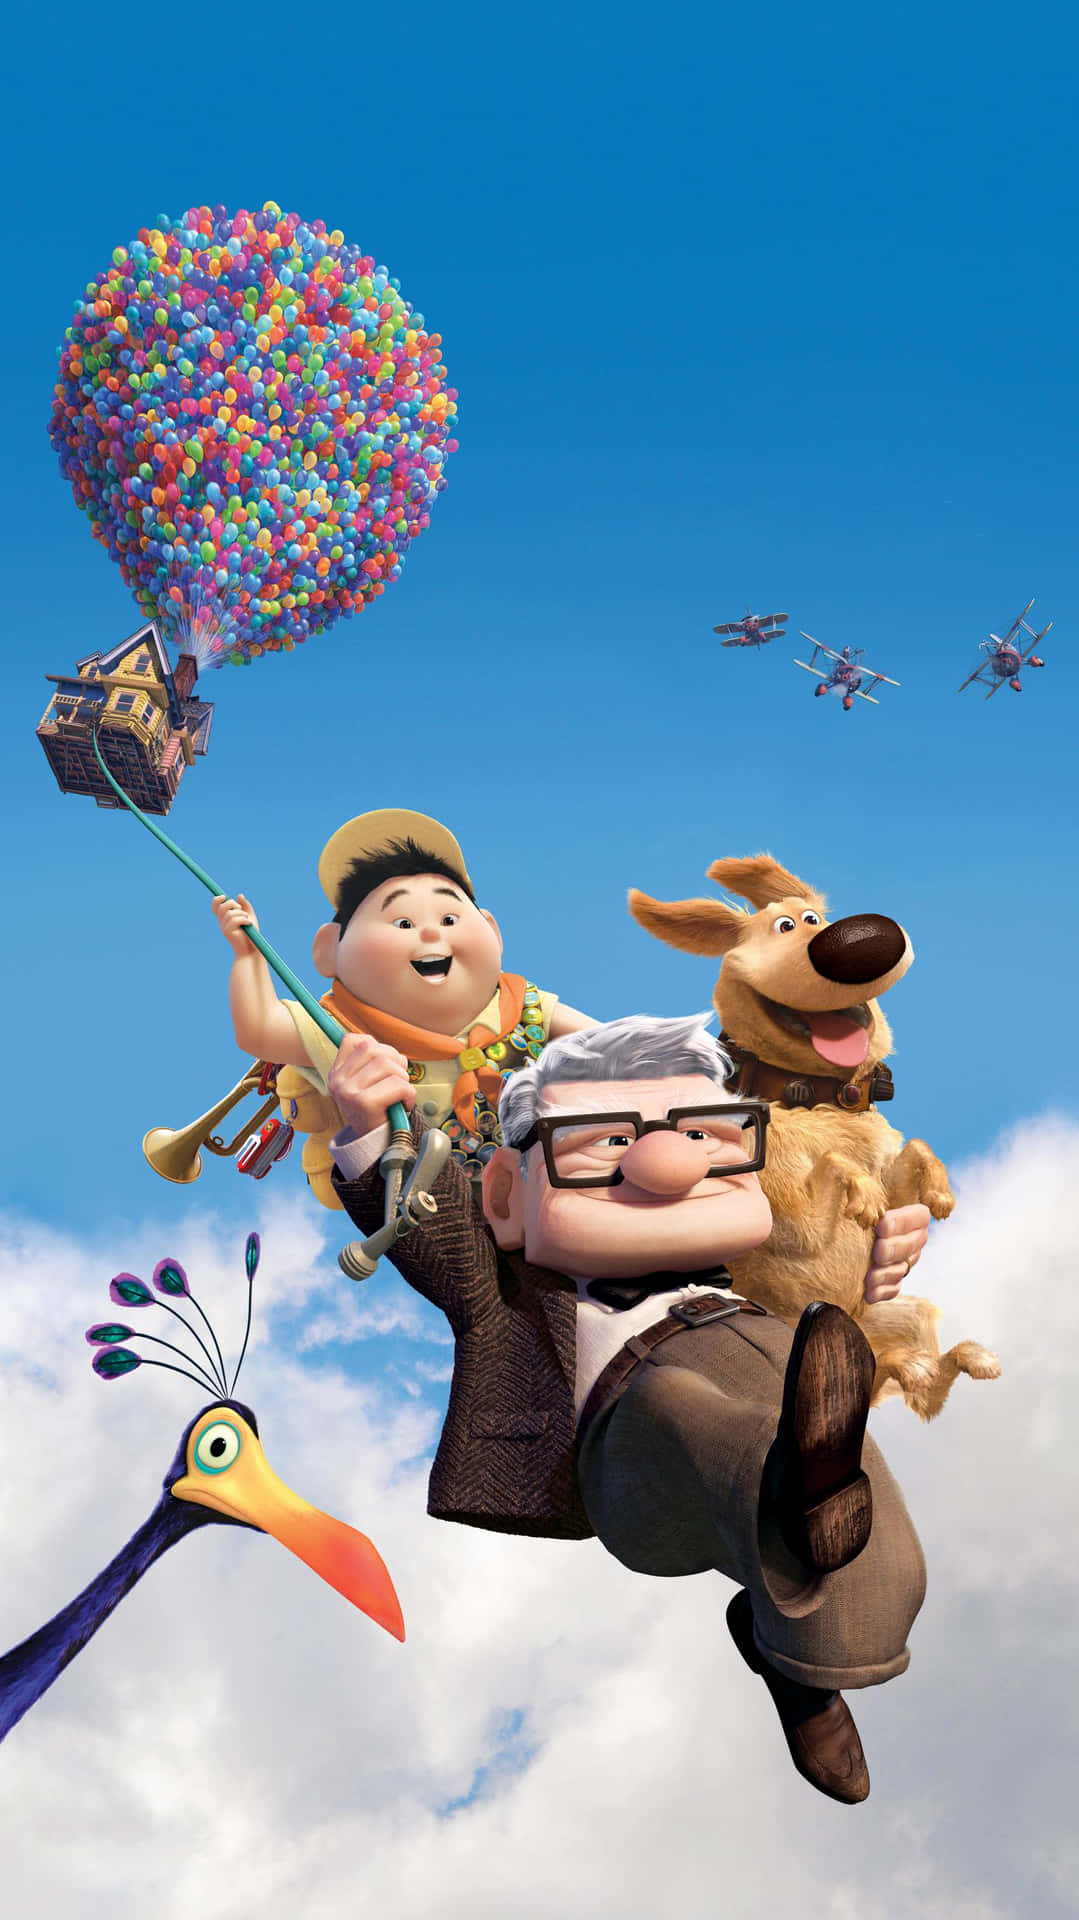 Caption: "Balloons Elevating a Quaint House in the Sky - Iconic Scene from the Up Movie" Wallpaper